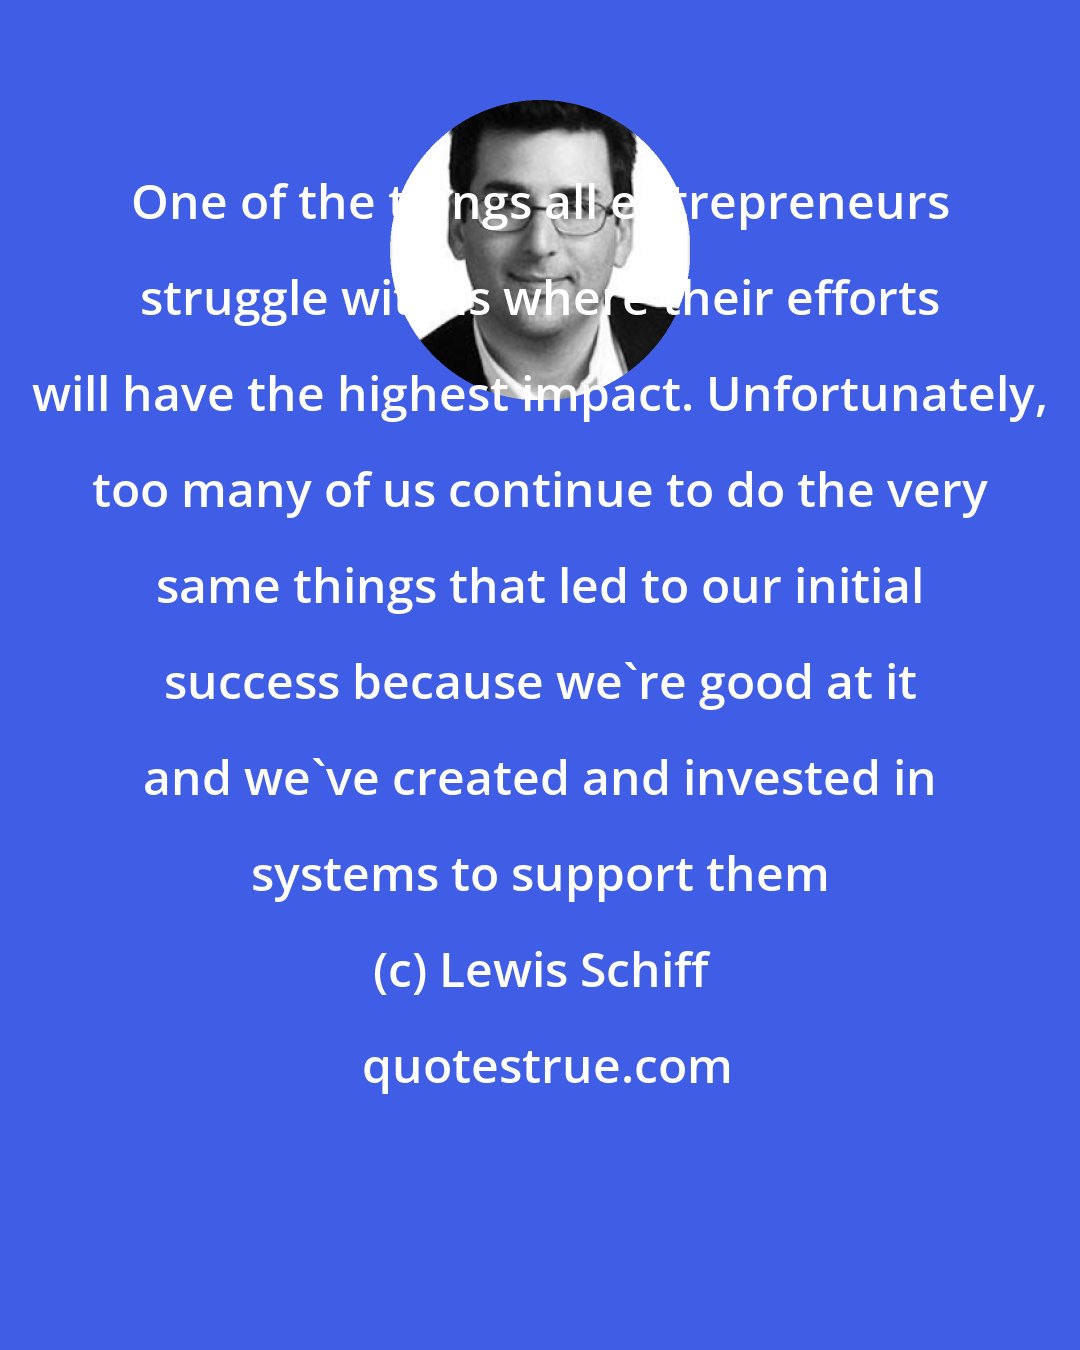 Lewis Schiff: One of the things all entrepreneurs struggle with is where their efforts will have the highest impact. Unfortunately, too many of us continue to do the very same things that led to our initial success because we're good at it and we've created and invested in systems to support them